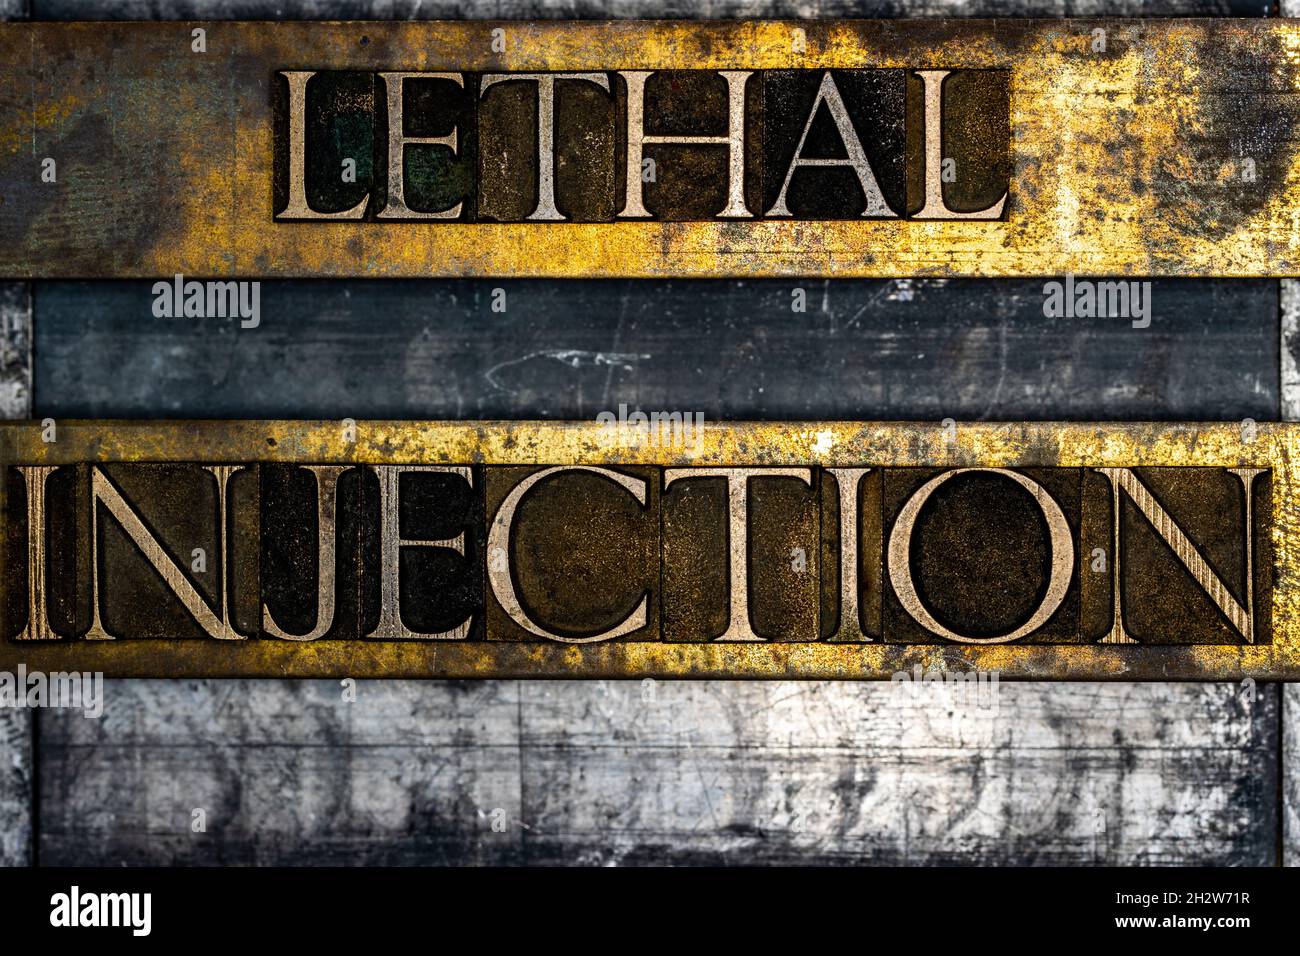 Lethal Injection text on textured grunge copper and vintage gold background Stock Photo